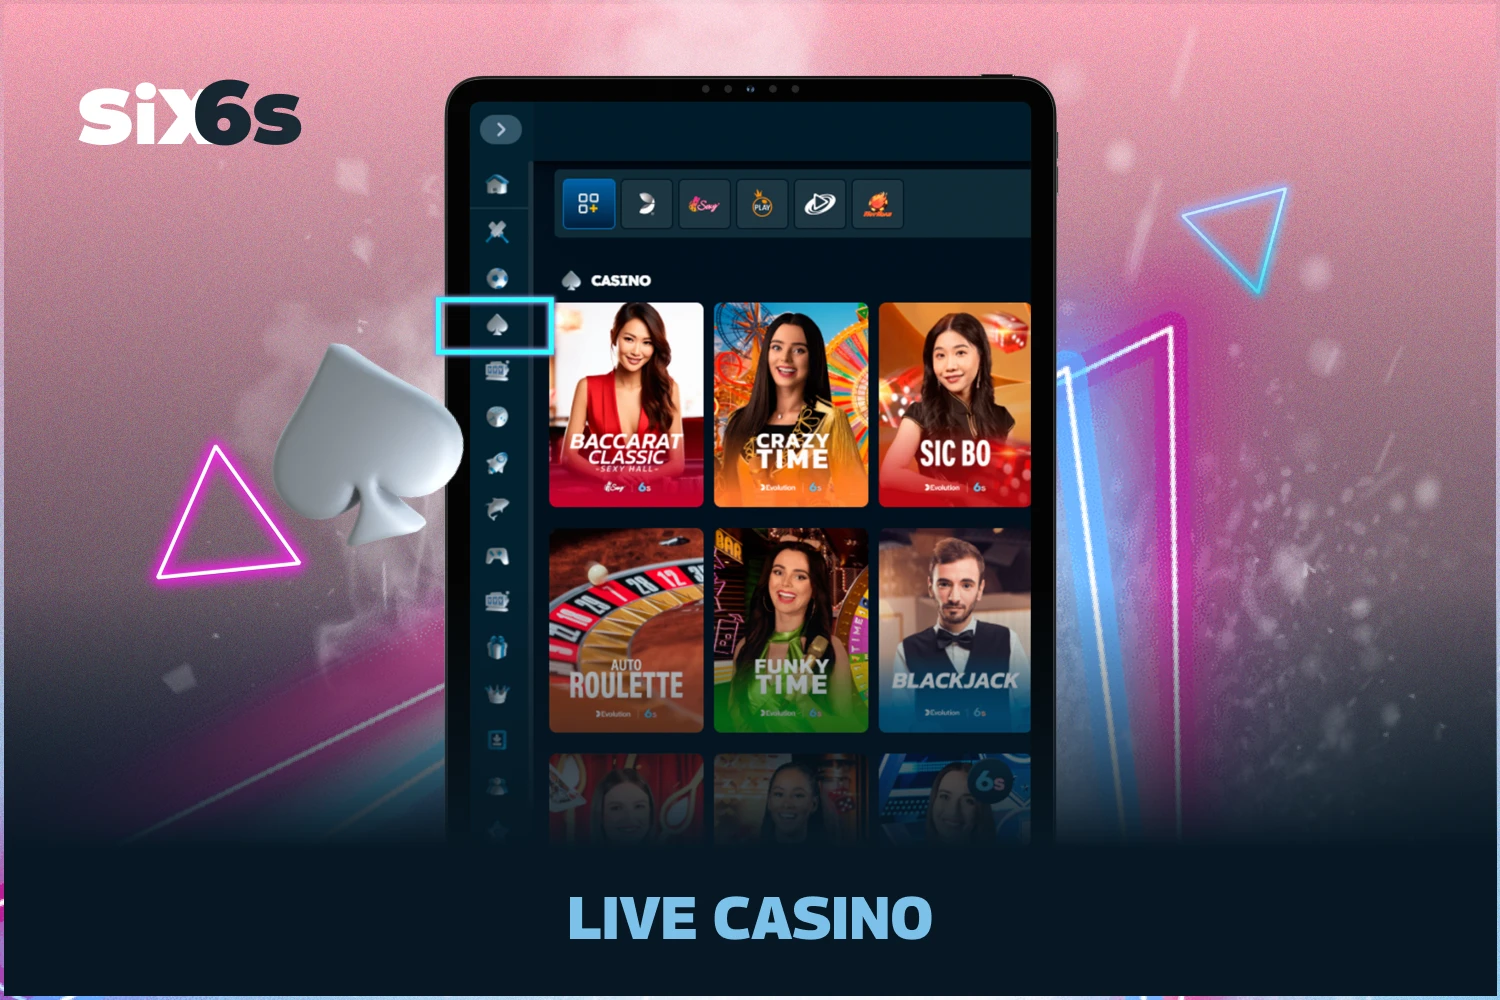 Live casino games rounds are run by live dealers and users from Bangladesh watch the live six6s broadcast and place bets